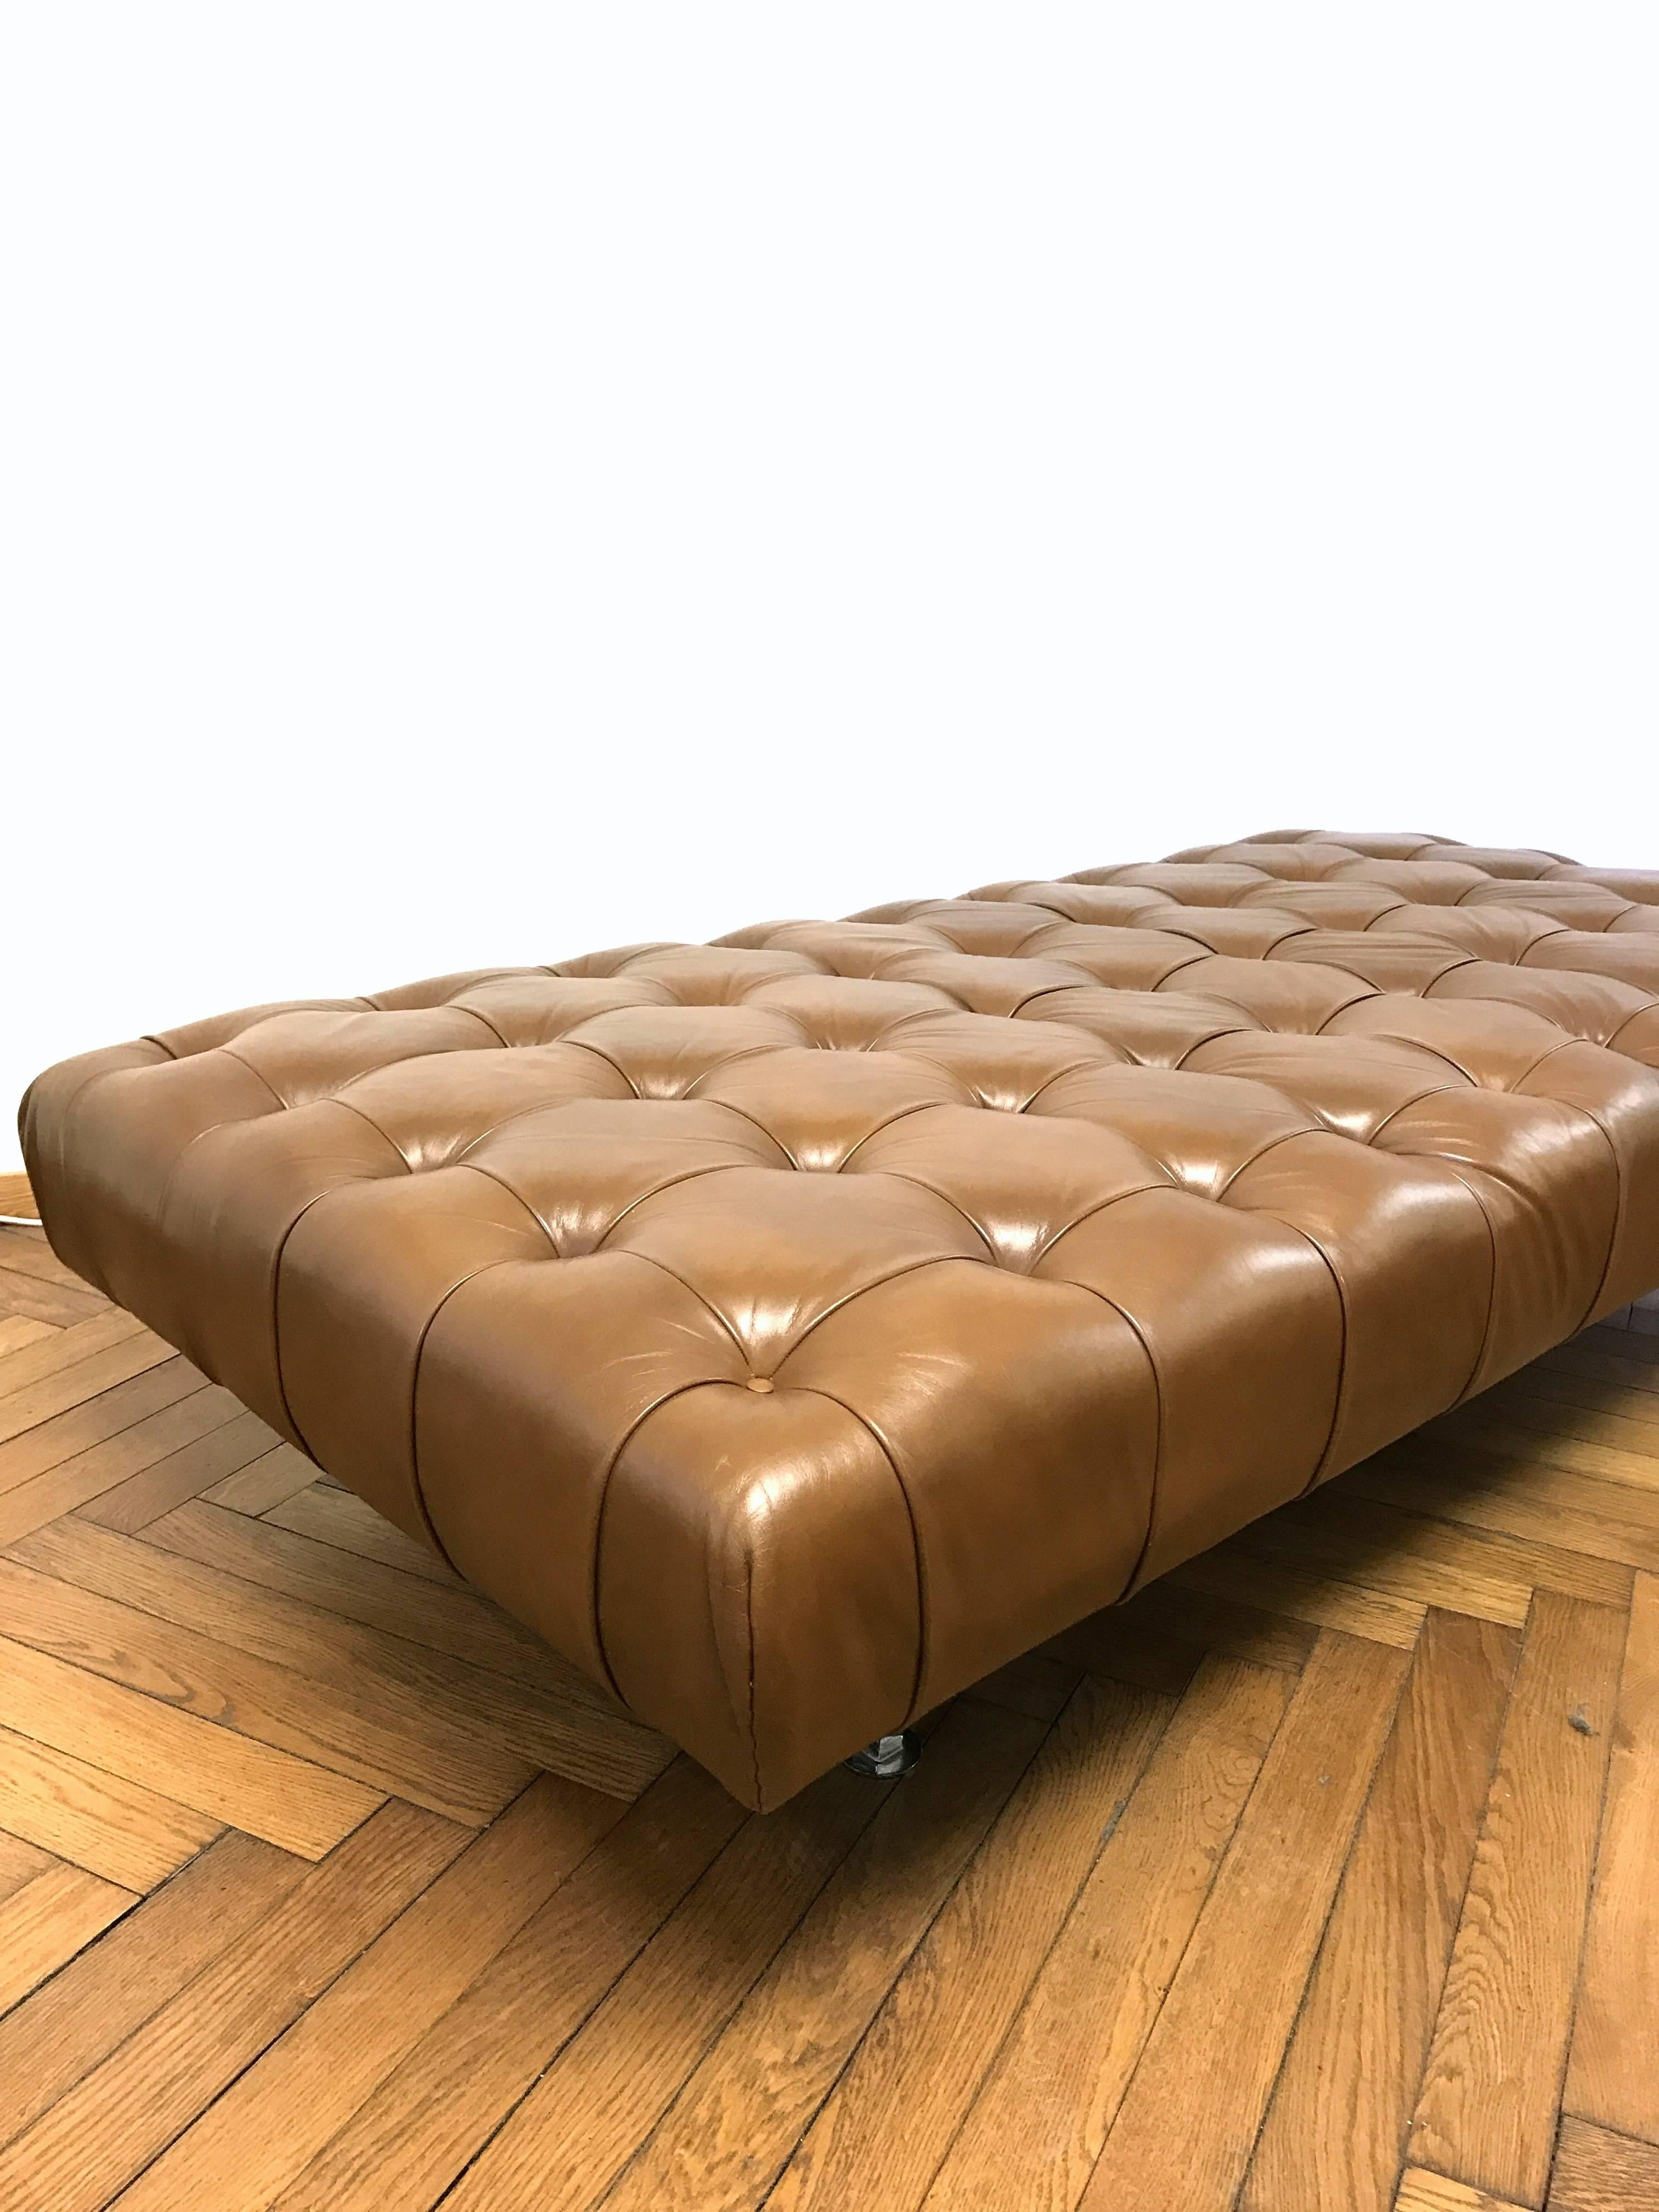 Design: attributed to Robert & Trix Haussmann.
Origin: Switzerland
Beautiful daybed with thick, brown, high quality leather. Very nice patina. This daybed was made 1965 in Switzerland.